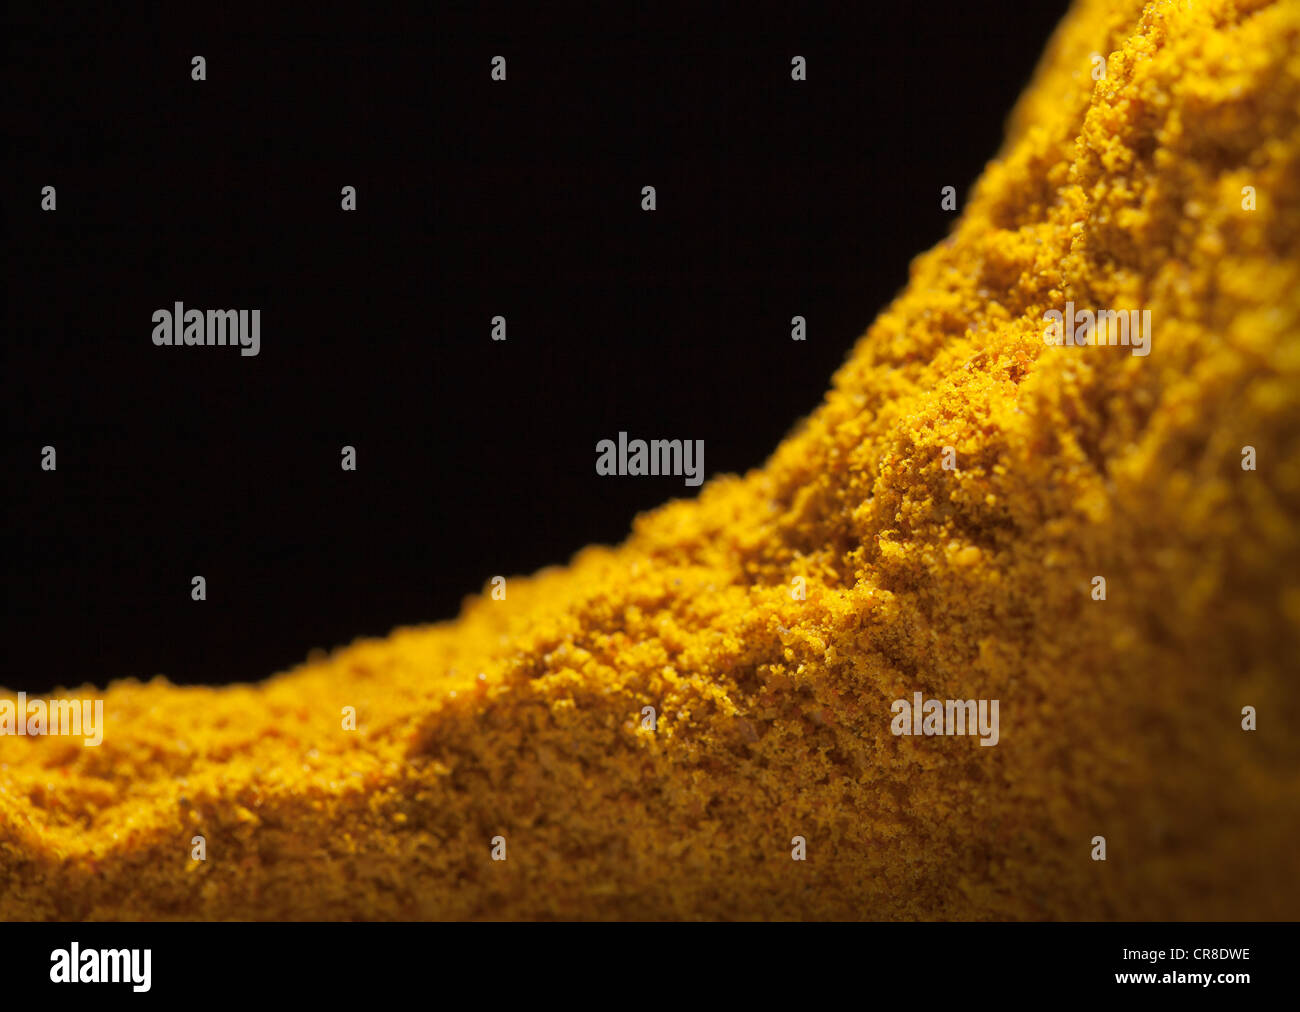 Creative cooking, closeup of curry texture Stock Photo